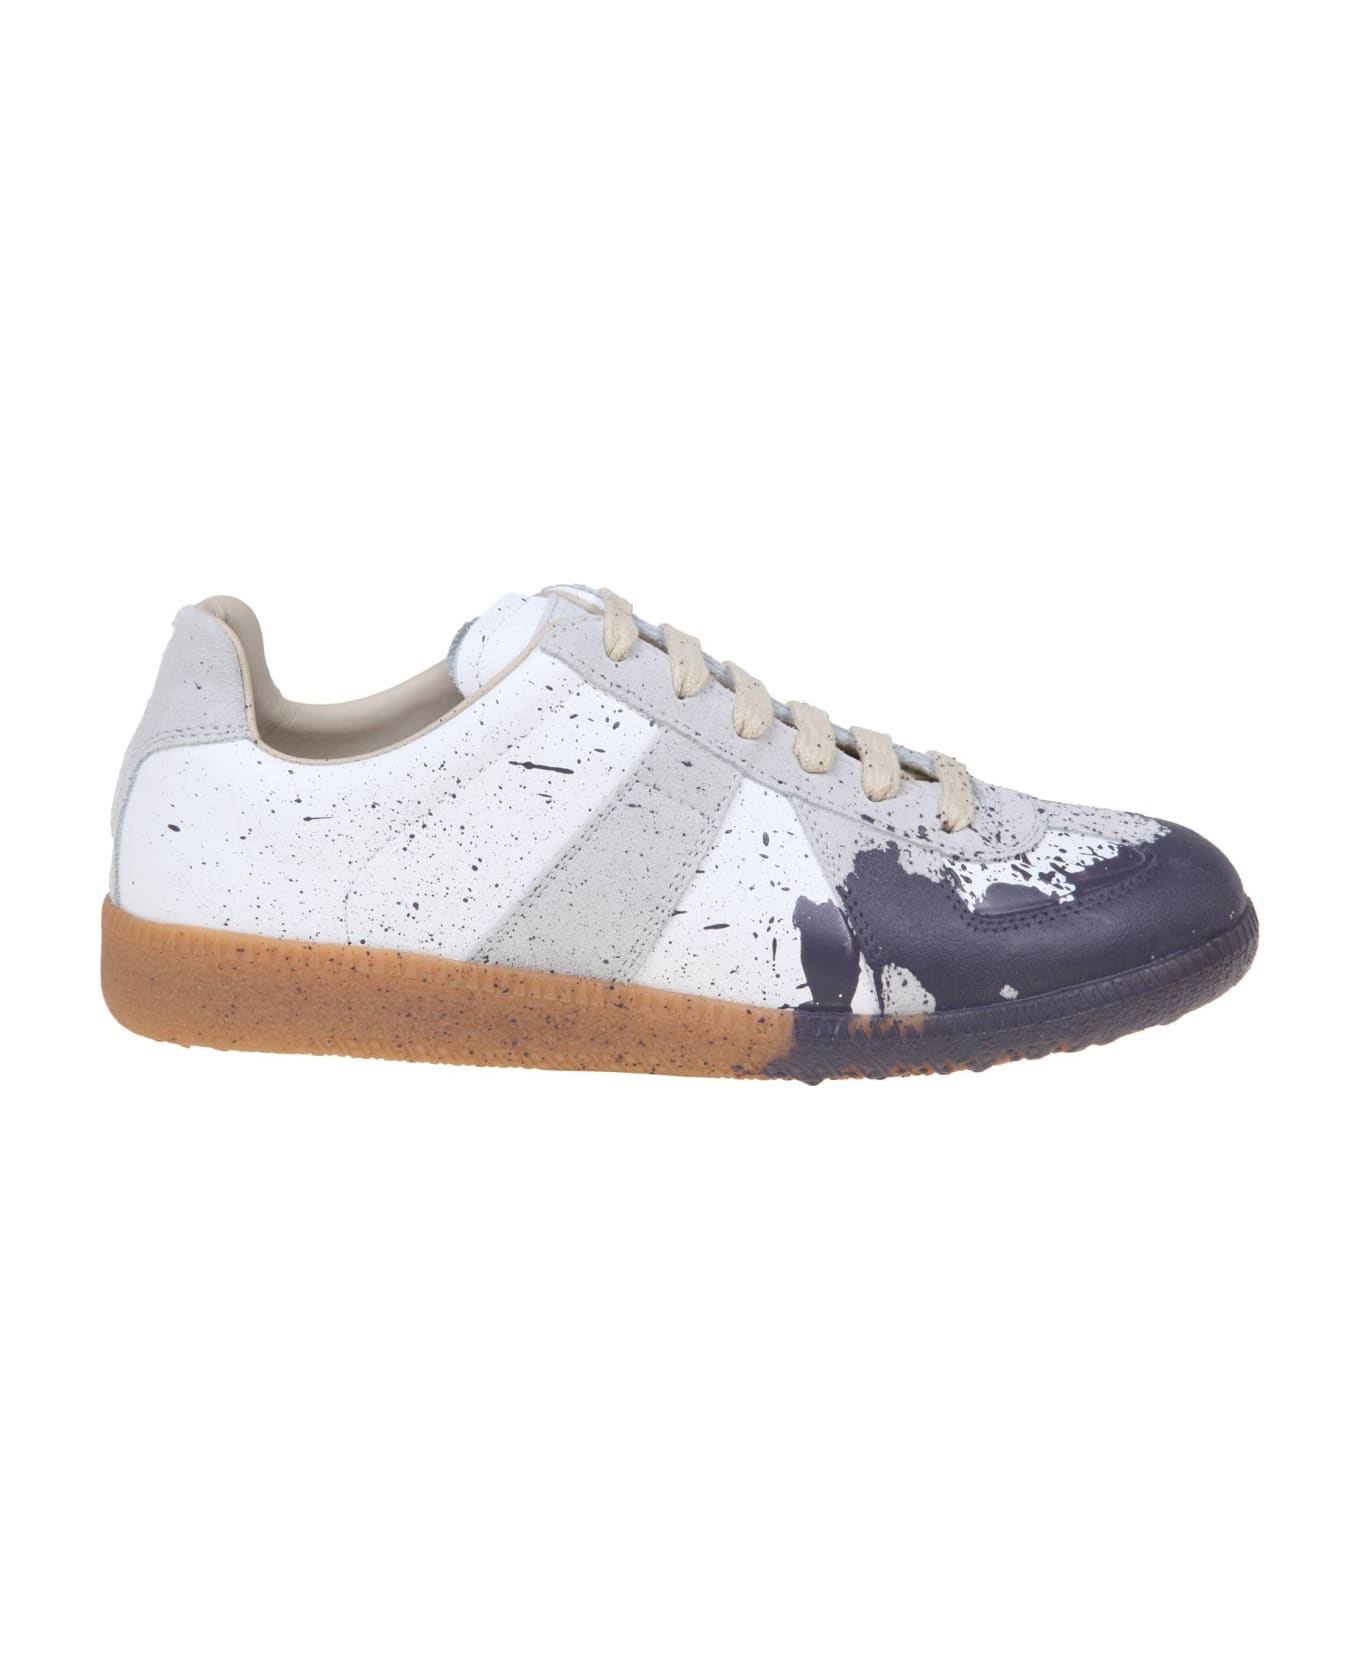 Maison Margiela Leather Sneakers With Paint Detail - White/Grey スニーカー